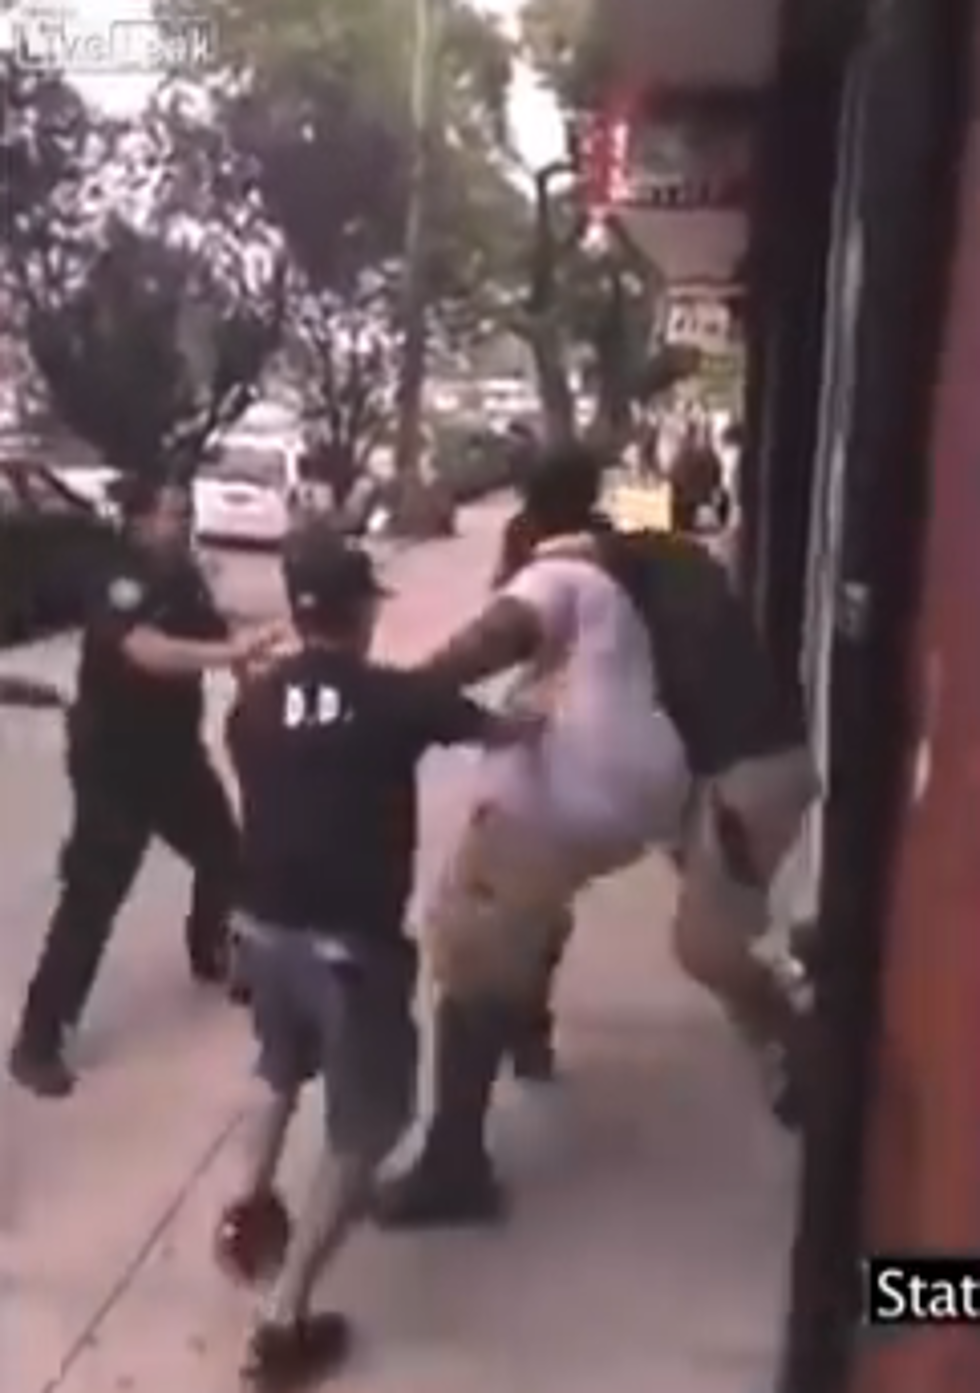 VOTE: Do you agree with decision not to charge Staten Island cop for a chokehold?